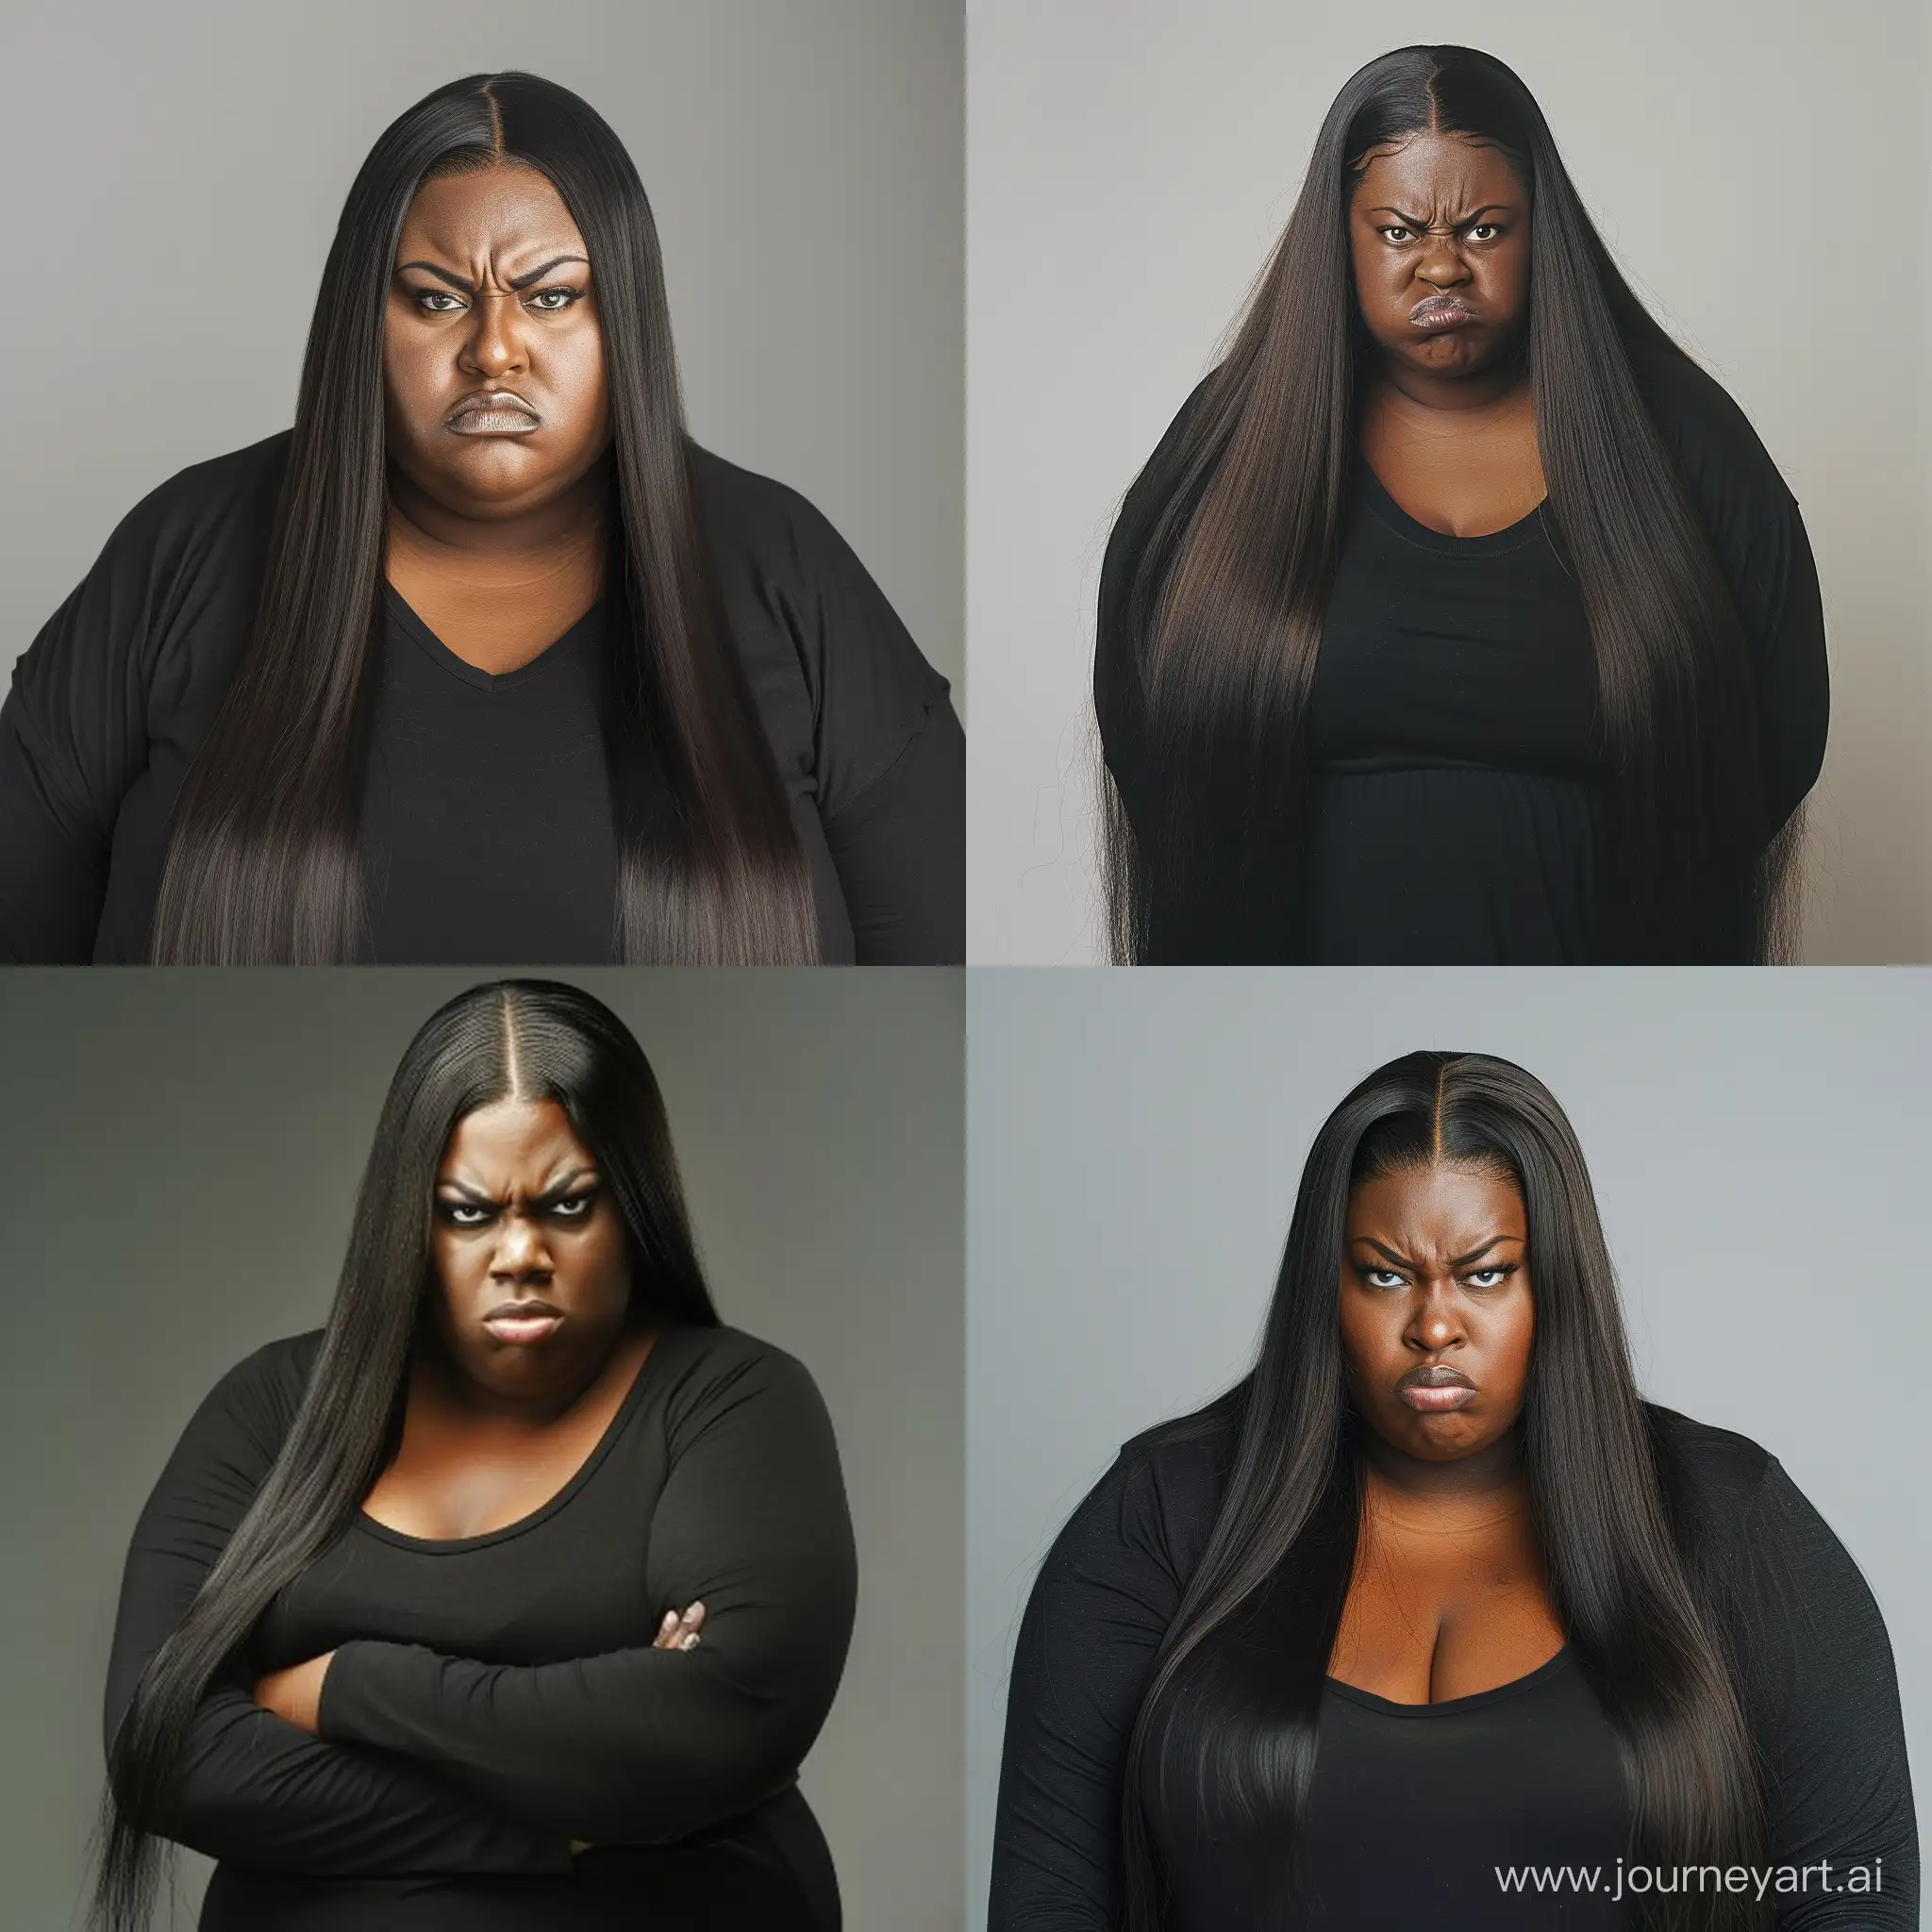 obese black woman, long straight hair, angry